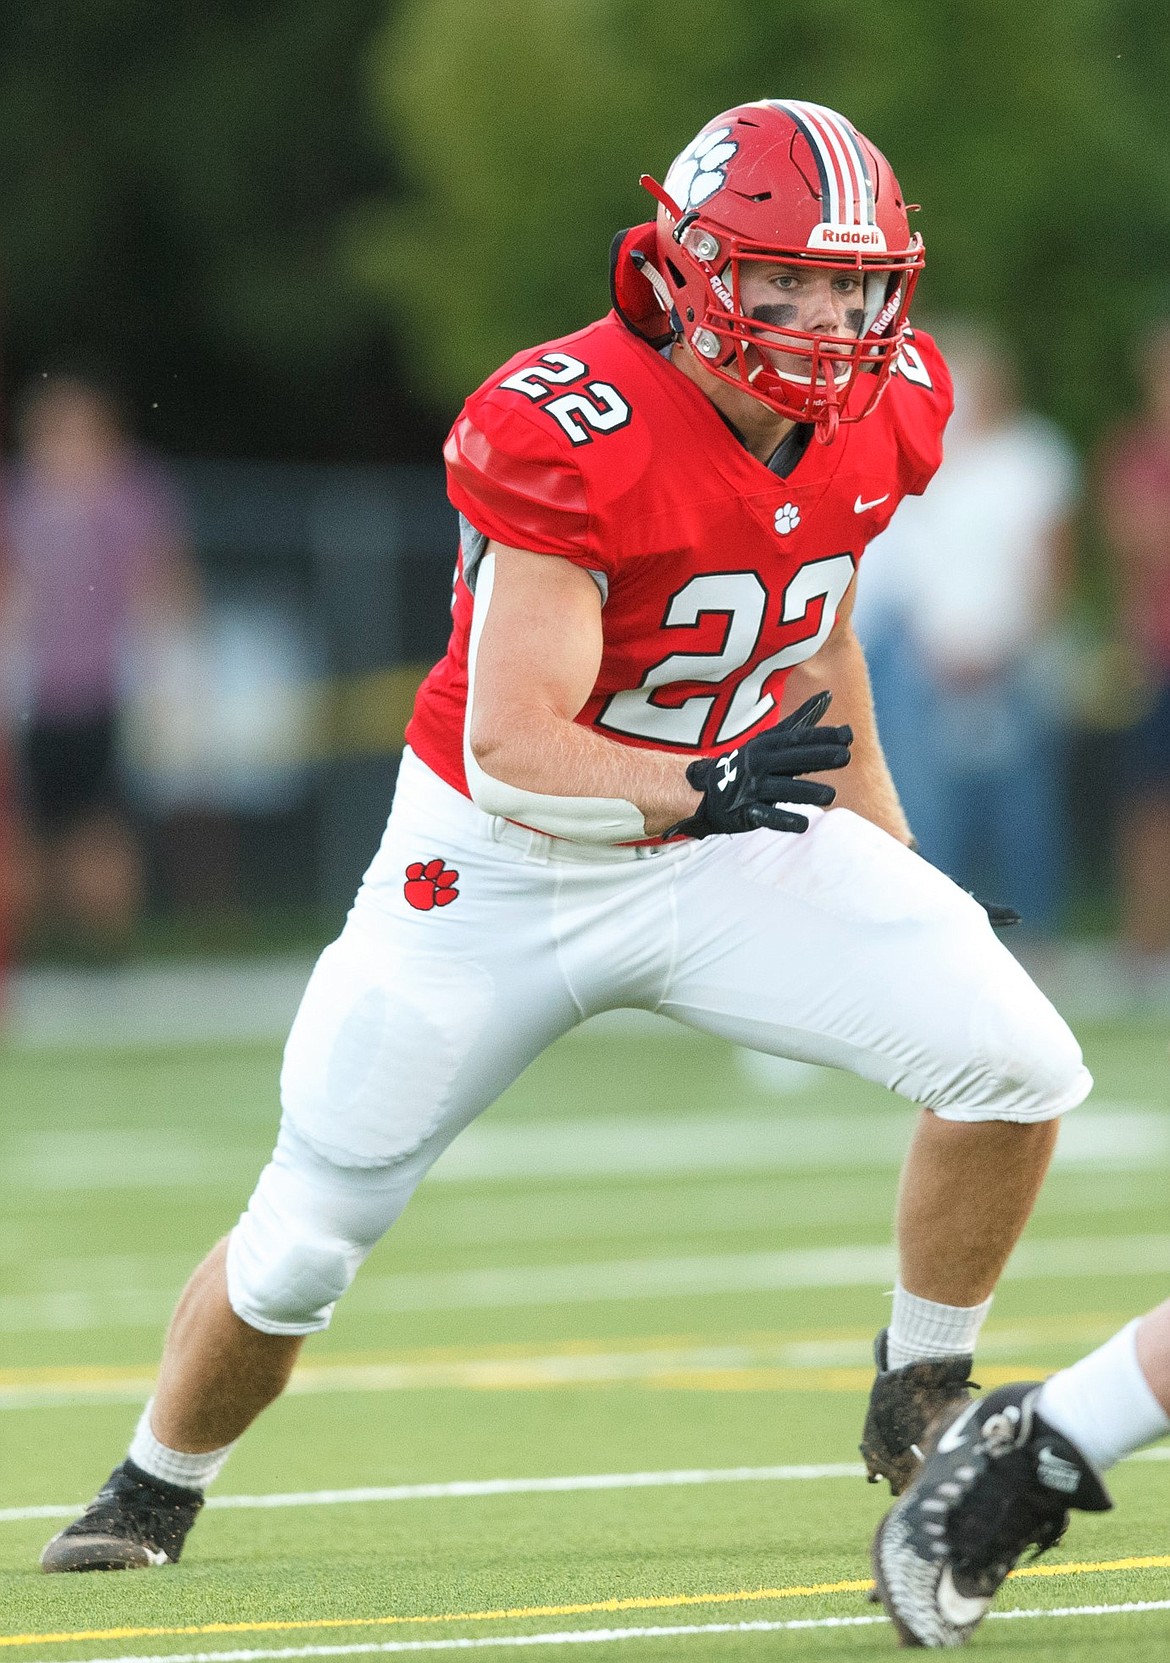 Sandpoint linebacker Tag Benefield was named to Northwest Spotlight's all-state team for defense.